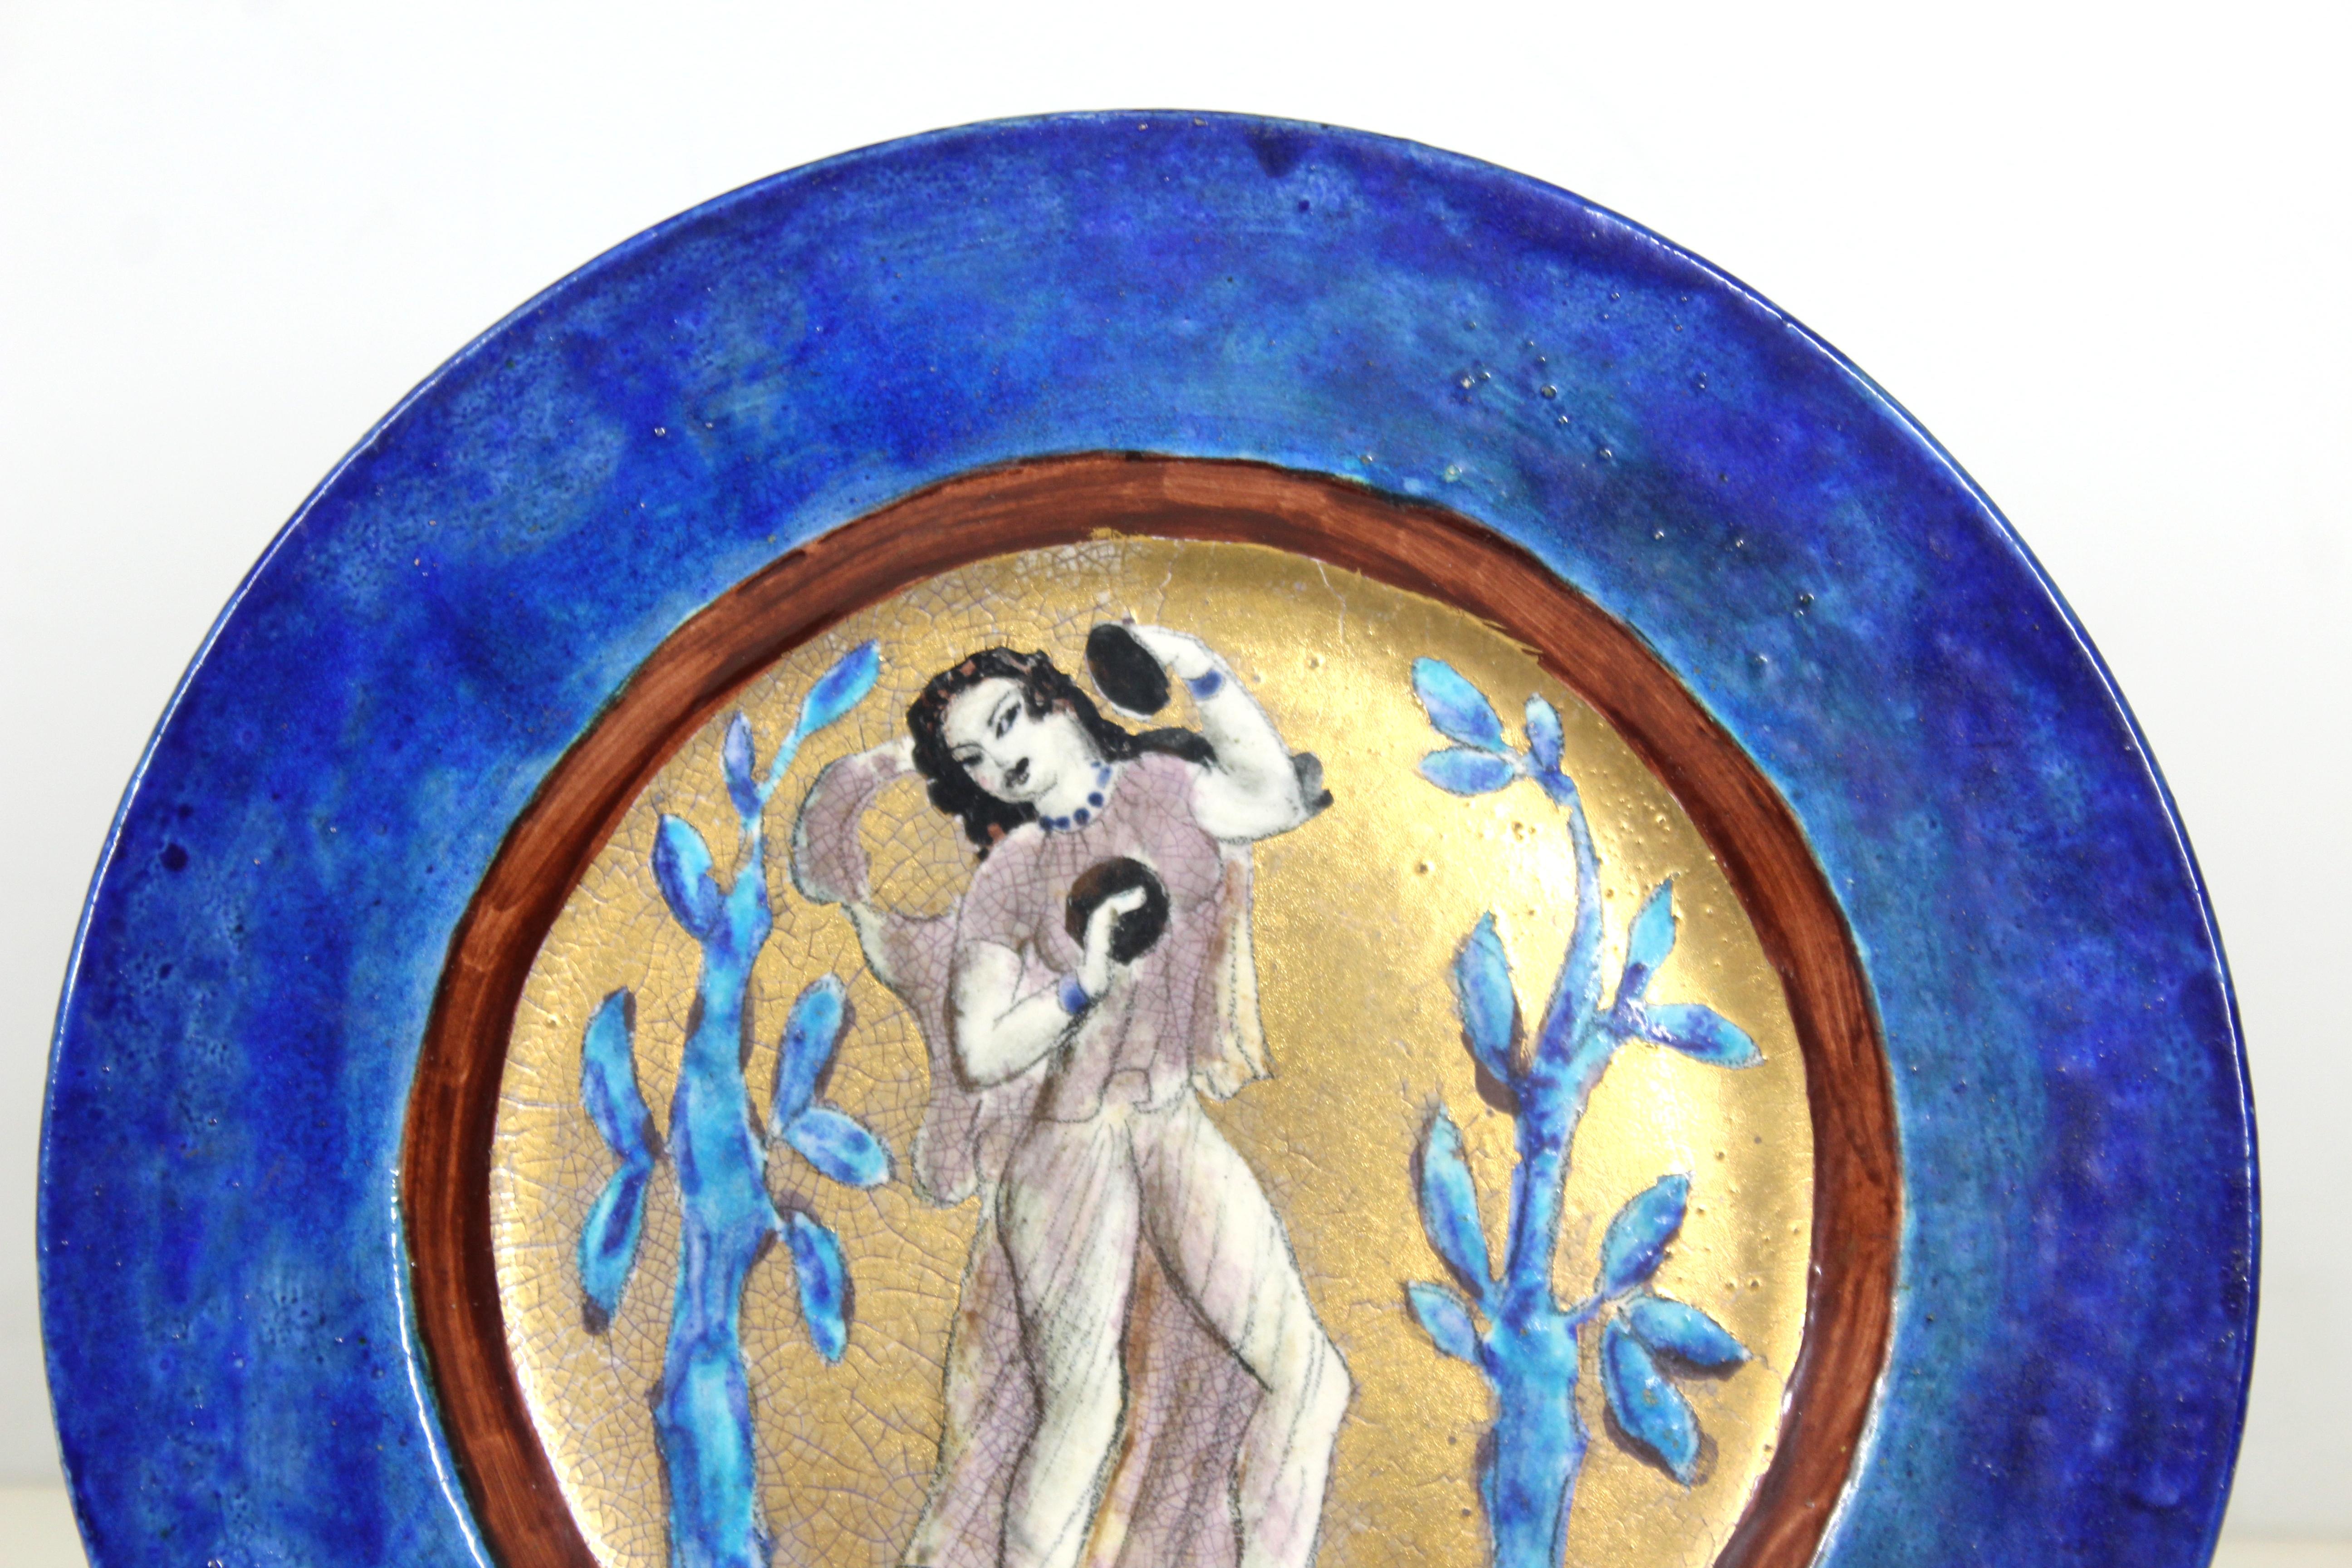 American Art Deco glazed ceramic charger plate in Persian blue and gold, made by Edith Varian Cockcroft (American 1881-1962). The piece presents a hand-painted and gilt center with  a pair of blue trees and an exotic female dancer holding cymbals.